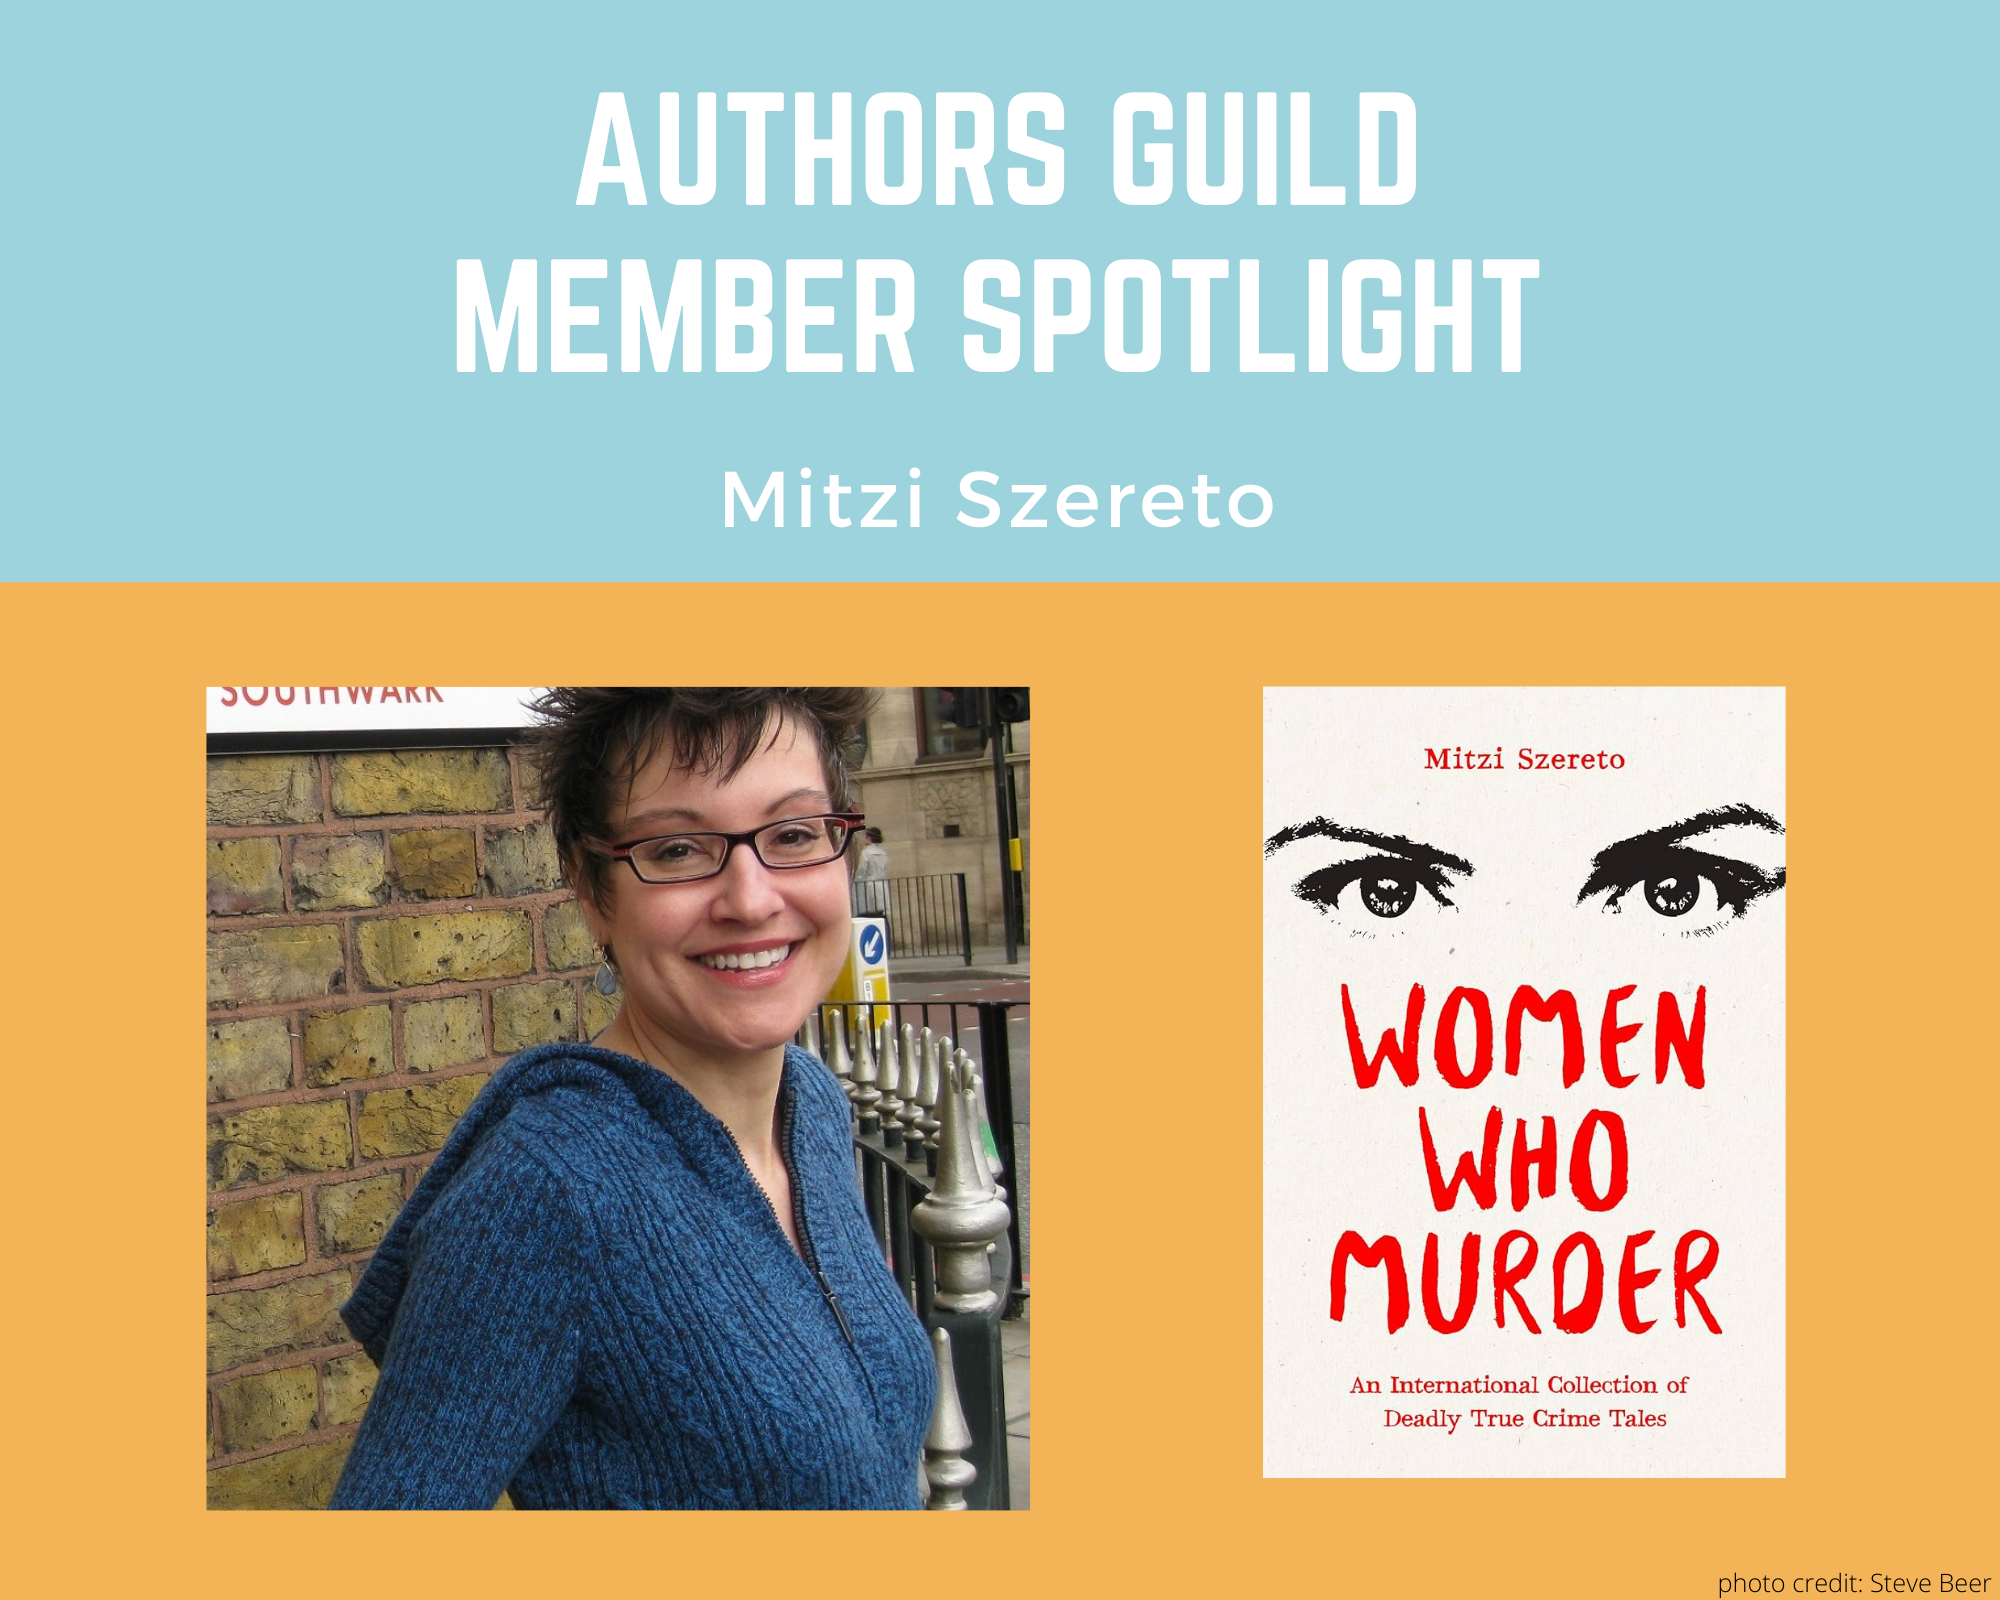 author Mitzi Szereto and an image of her book Women Who Murder